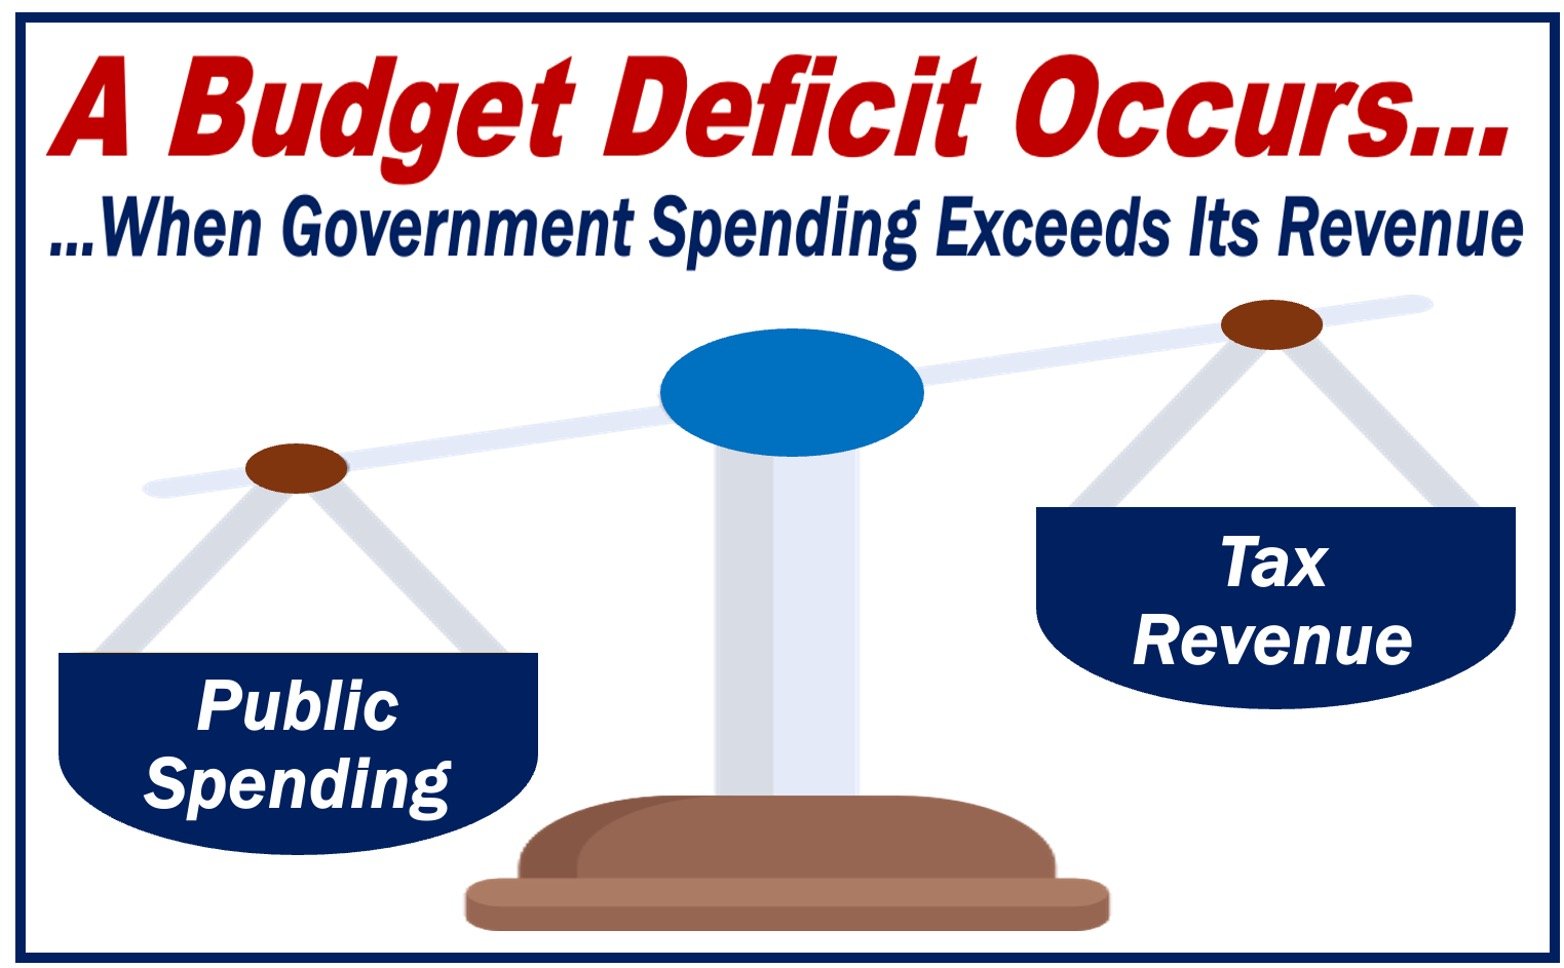 See-saw scales with public spending on one side and tax revenue on the other, plus a definition of BUDGET DEFICIT.